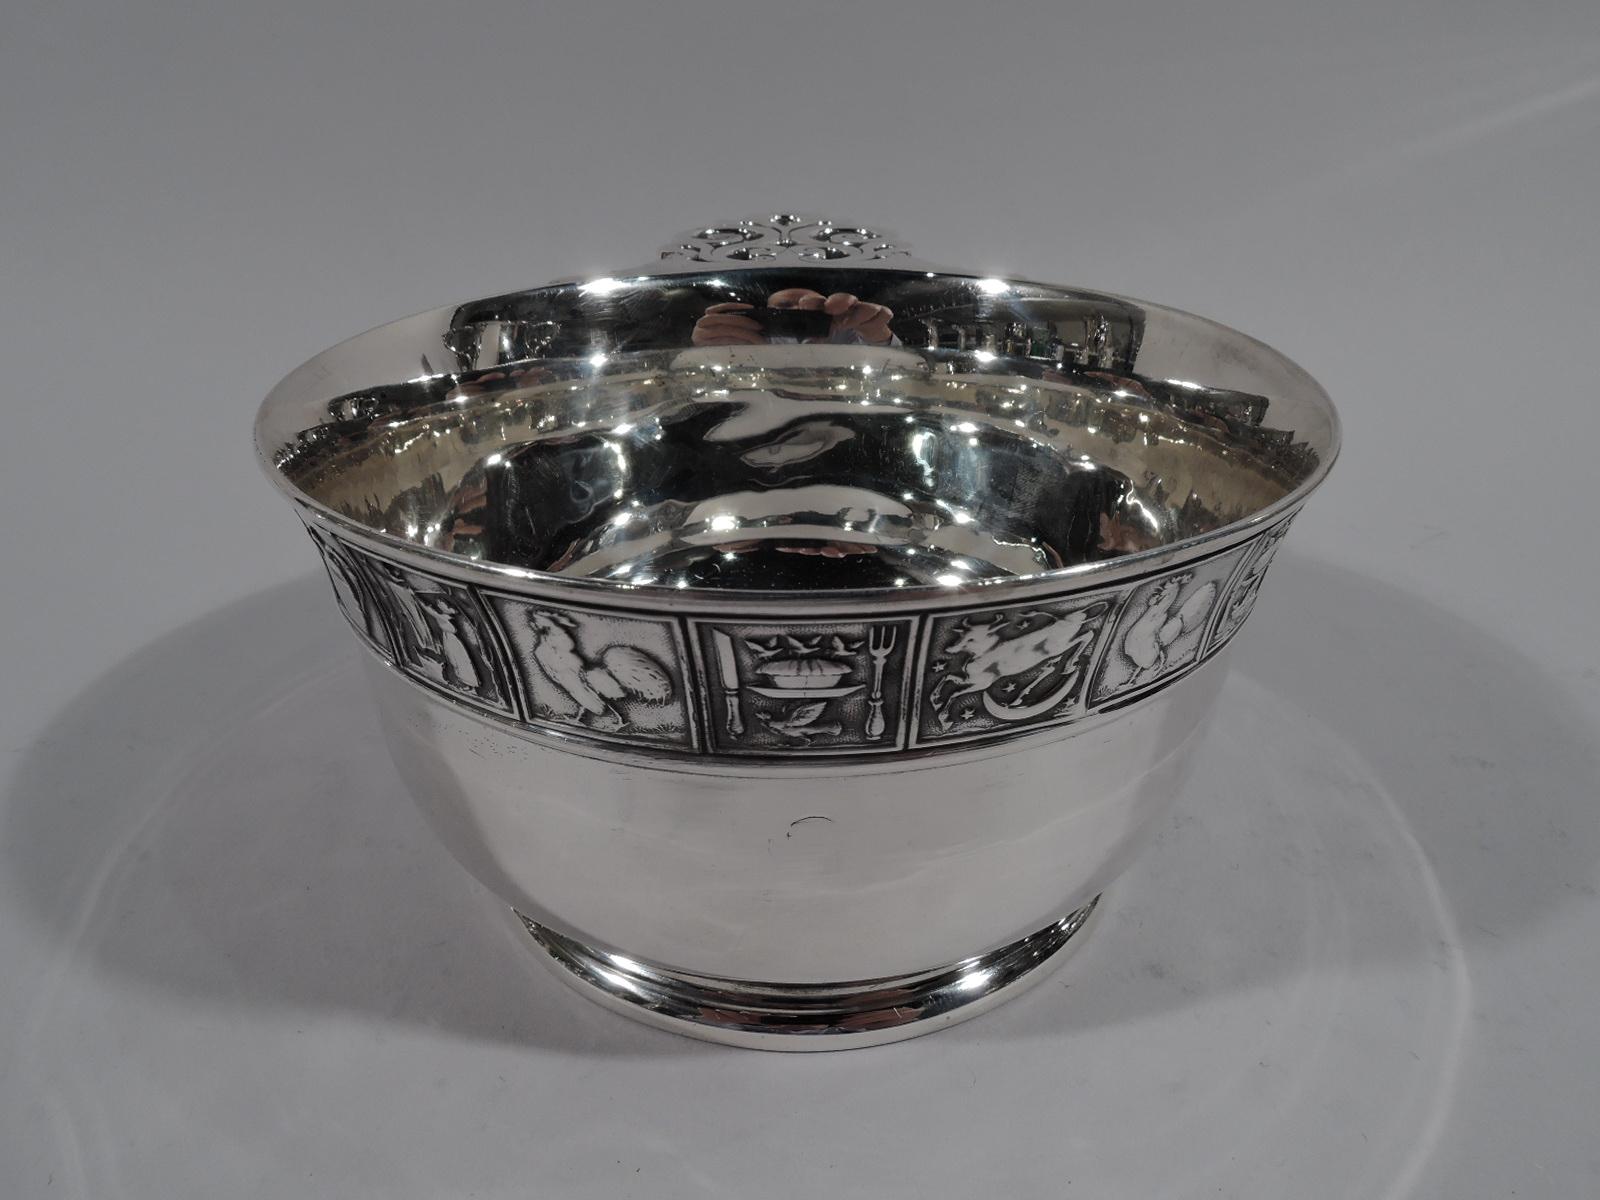 Large turn-of-the-century Edwardian sterling silver porringer. Made by Gorham in Providence. Deep and tapering bowl with raised foot and open scrolled handled. Rim border comprising square frames with low-relief pictogram-style representations of